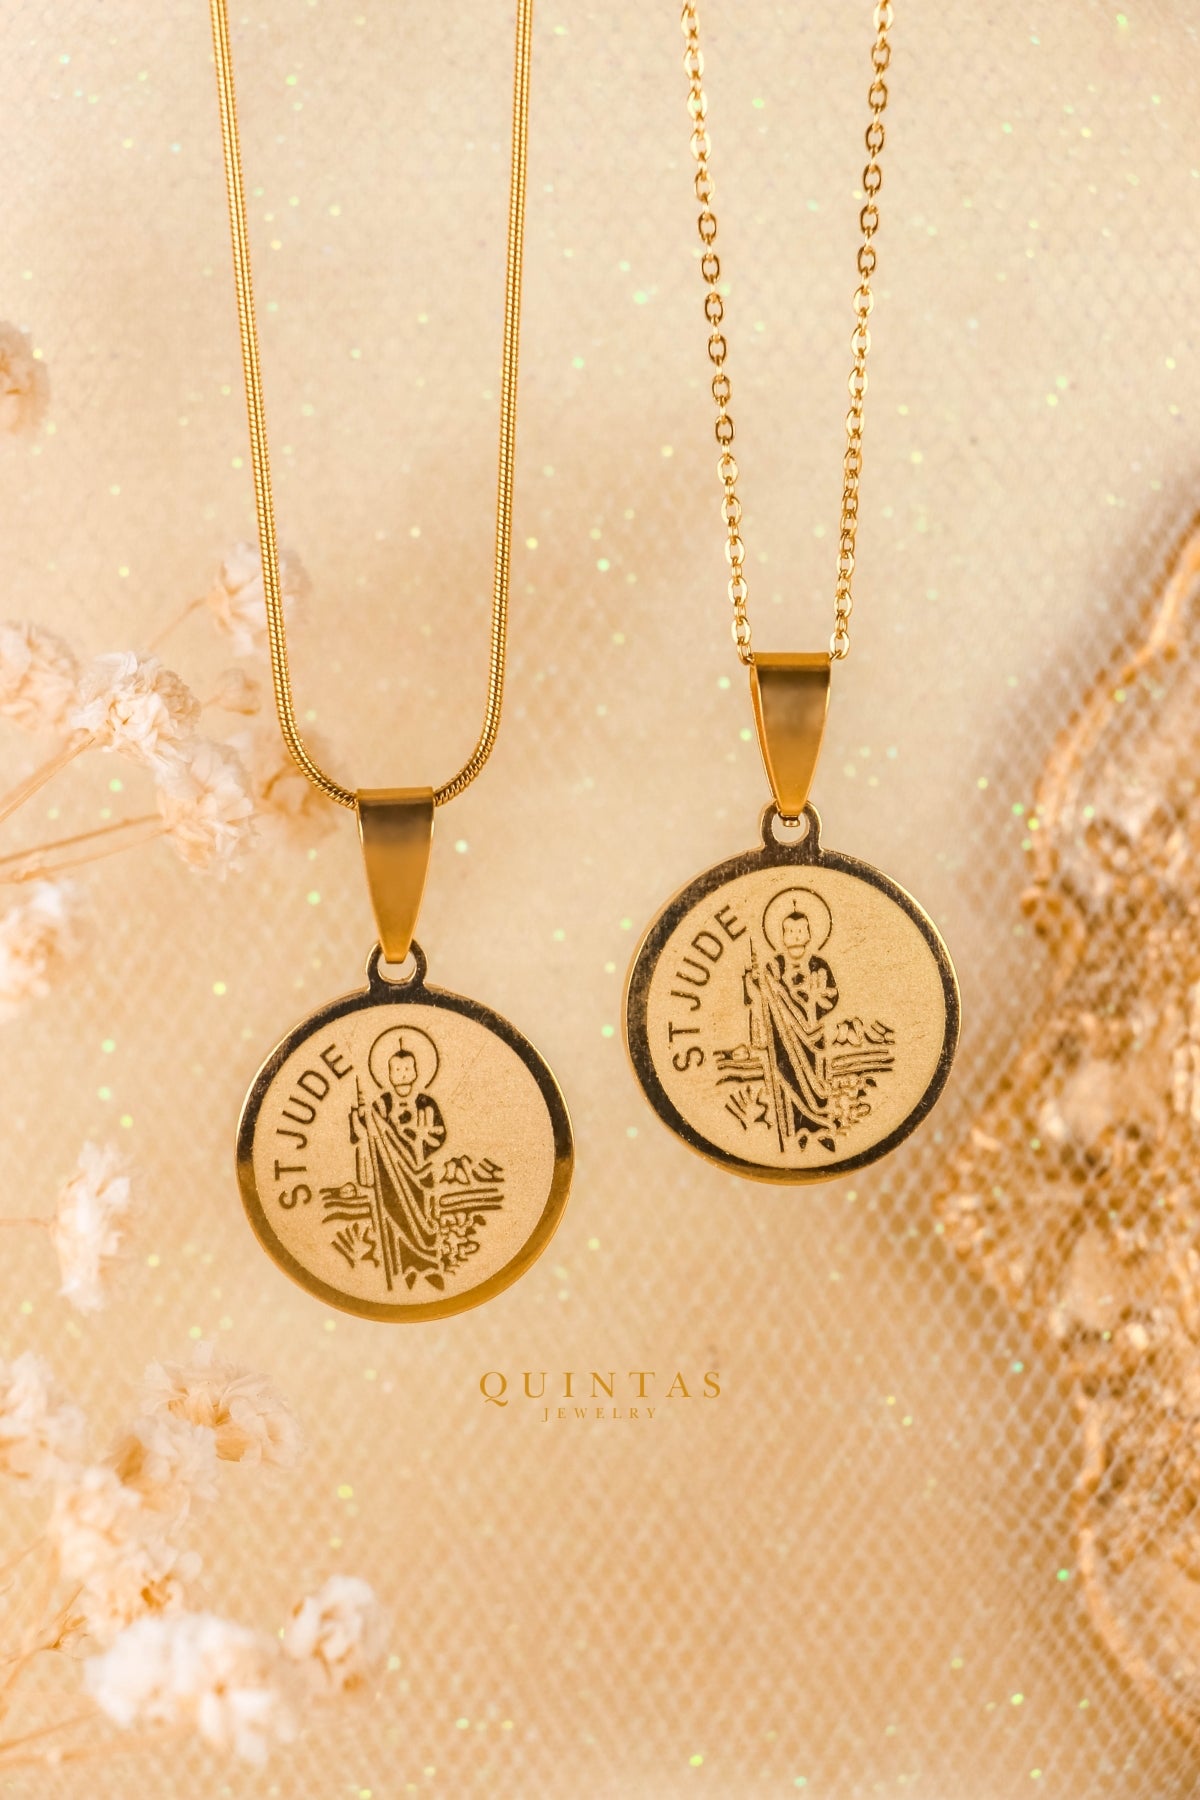 Saint Jude medallion Pendant Necklace in Gold (Yellow/Rose/White)